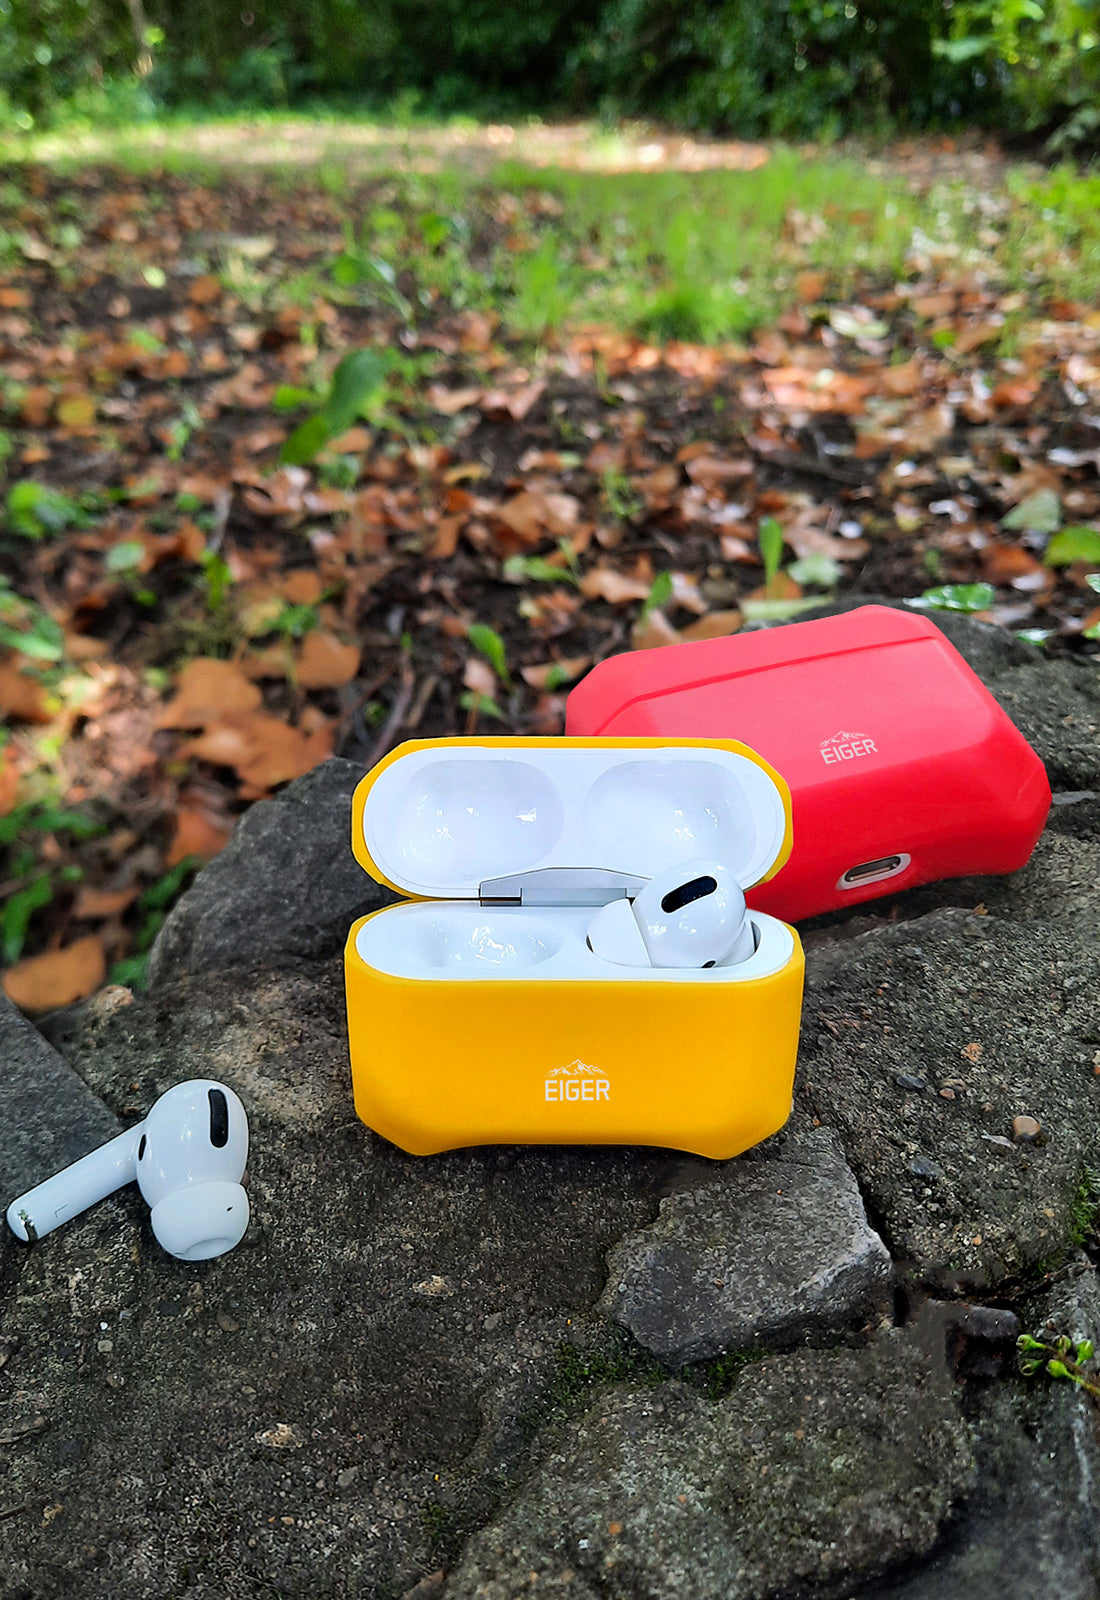 2 sets of airpods outside on rock, each wireless earphone set is in a colourful silicone protective case from eiger in yellow and red